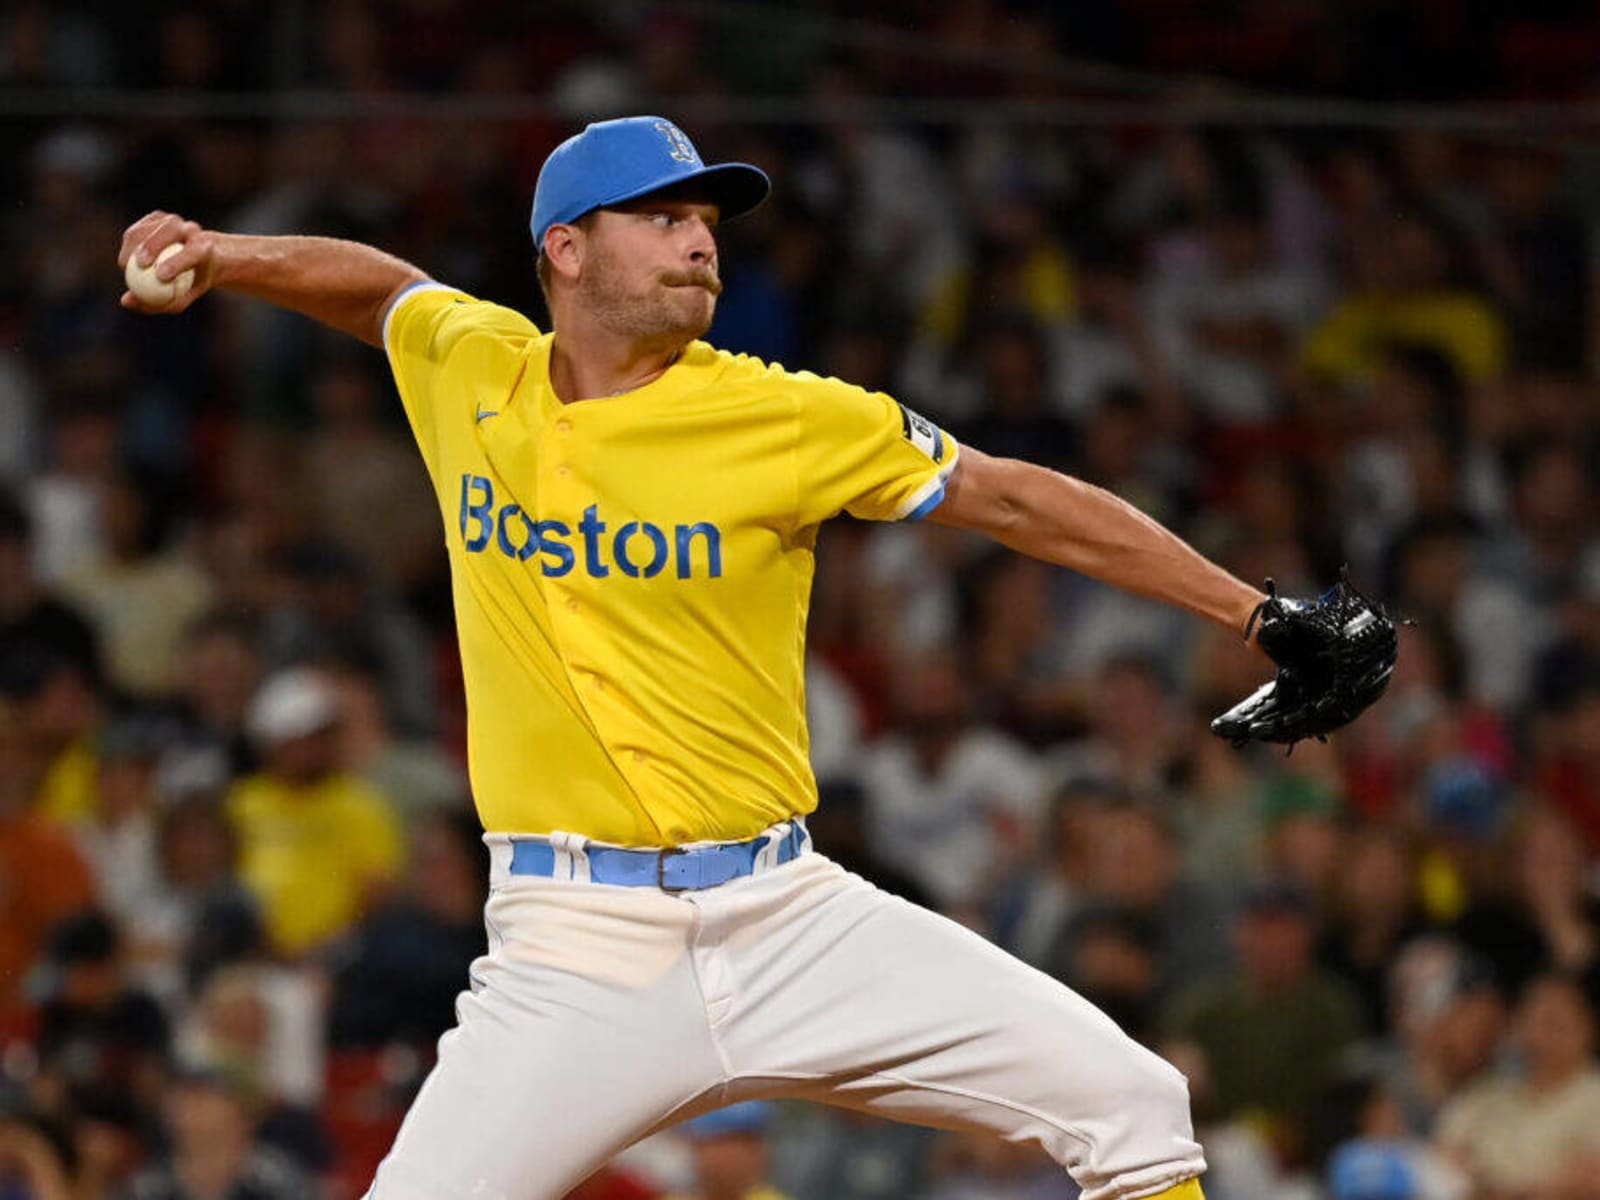 Red Sox: blue-and-yellow uniforms for Patriots' Day, National Sports